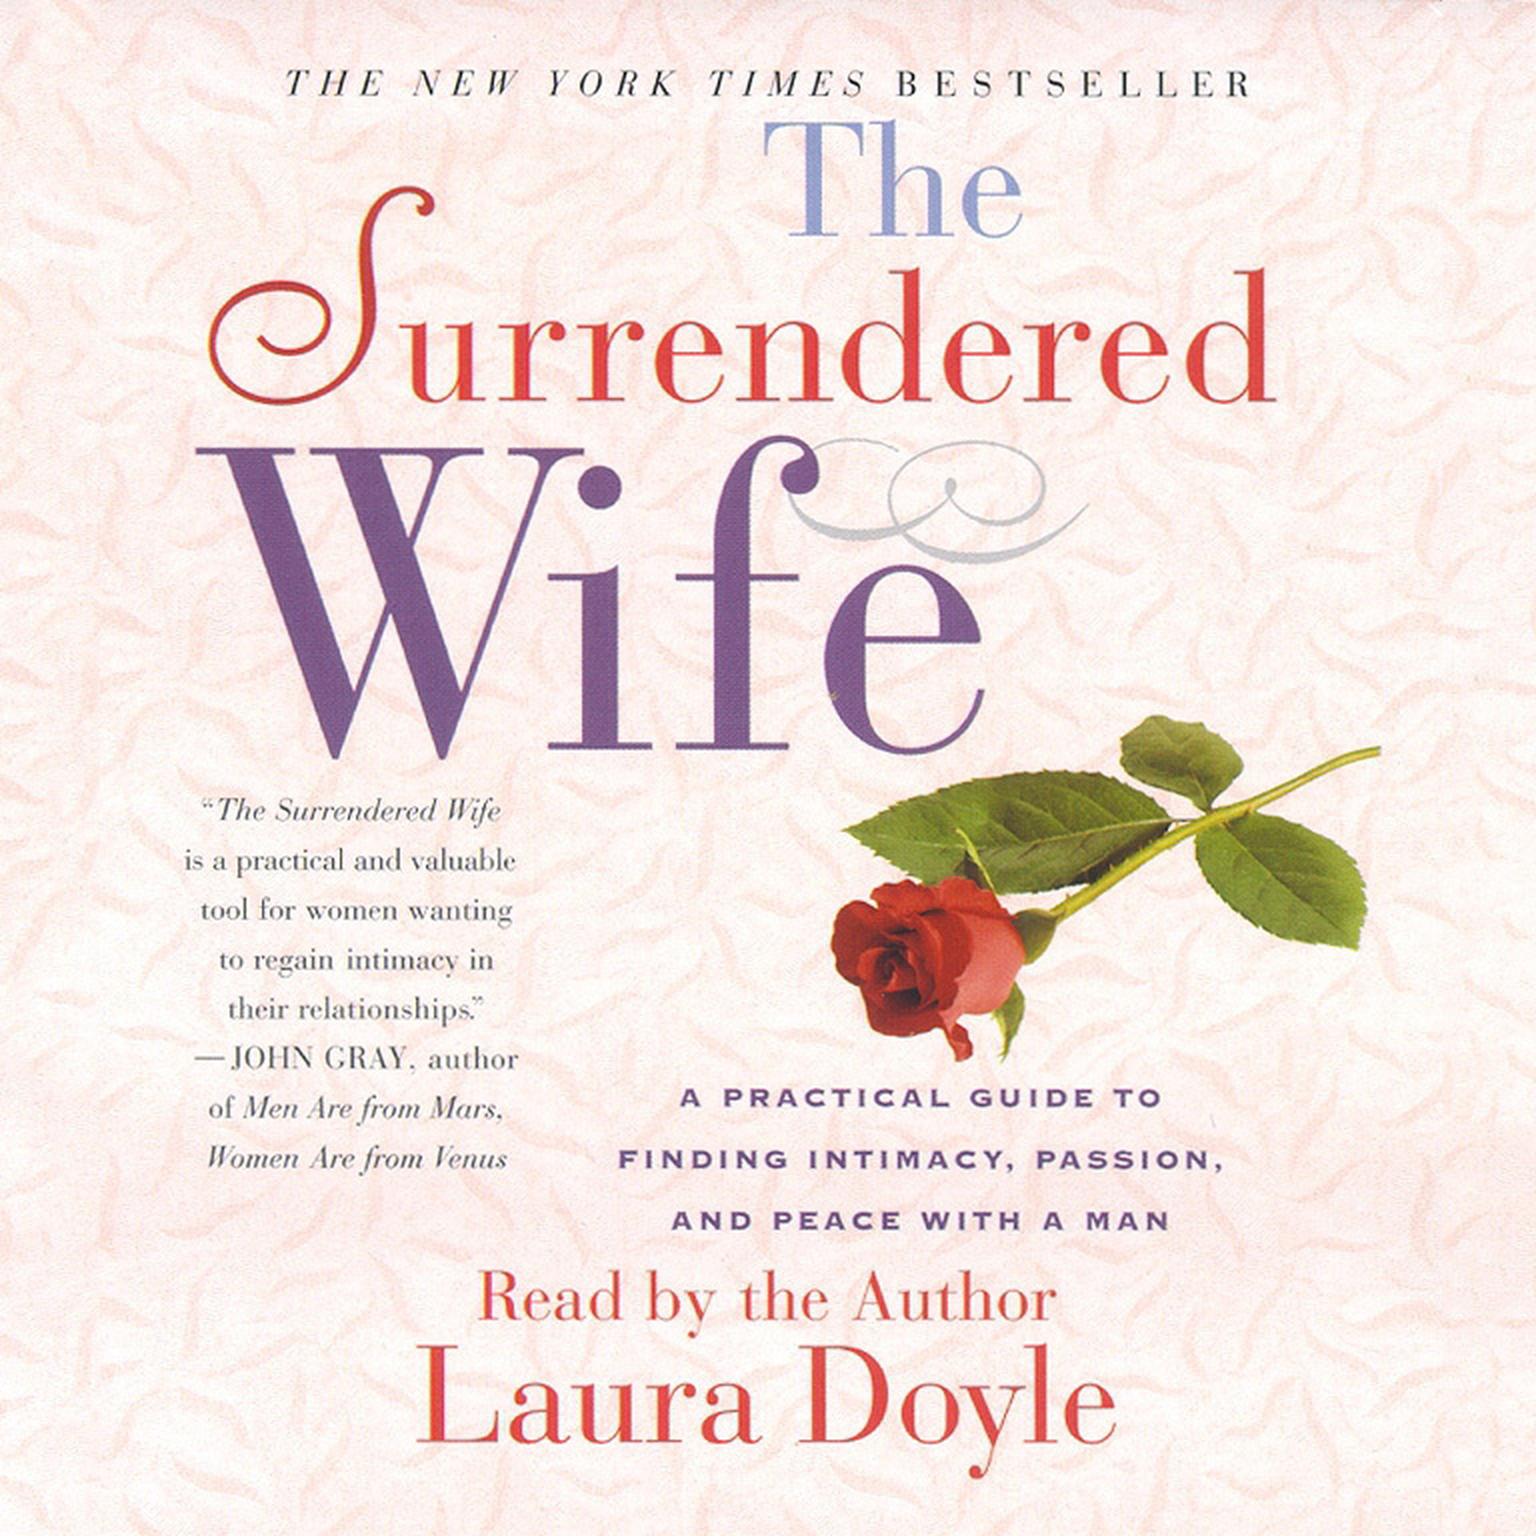 The Surrendered Wife (Abridged): A Practical Guide To Finding Intimacy, Passion and Peace Audiobook, by Laura Doyle